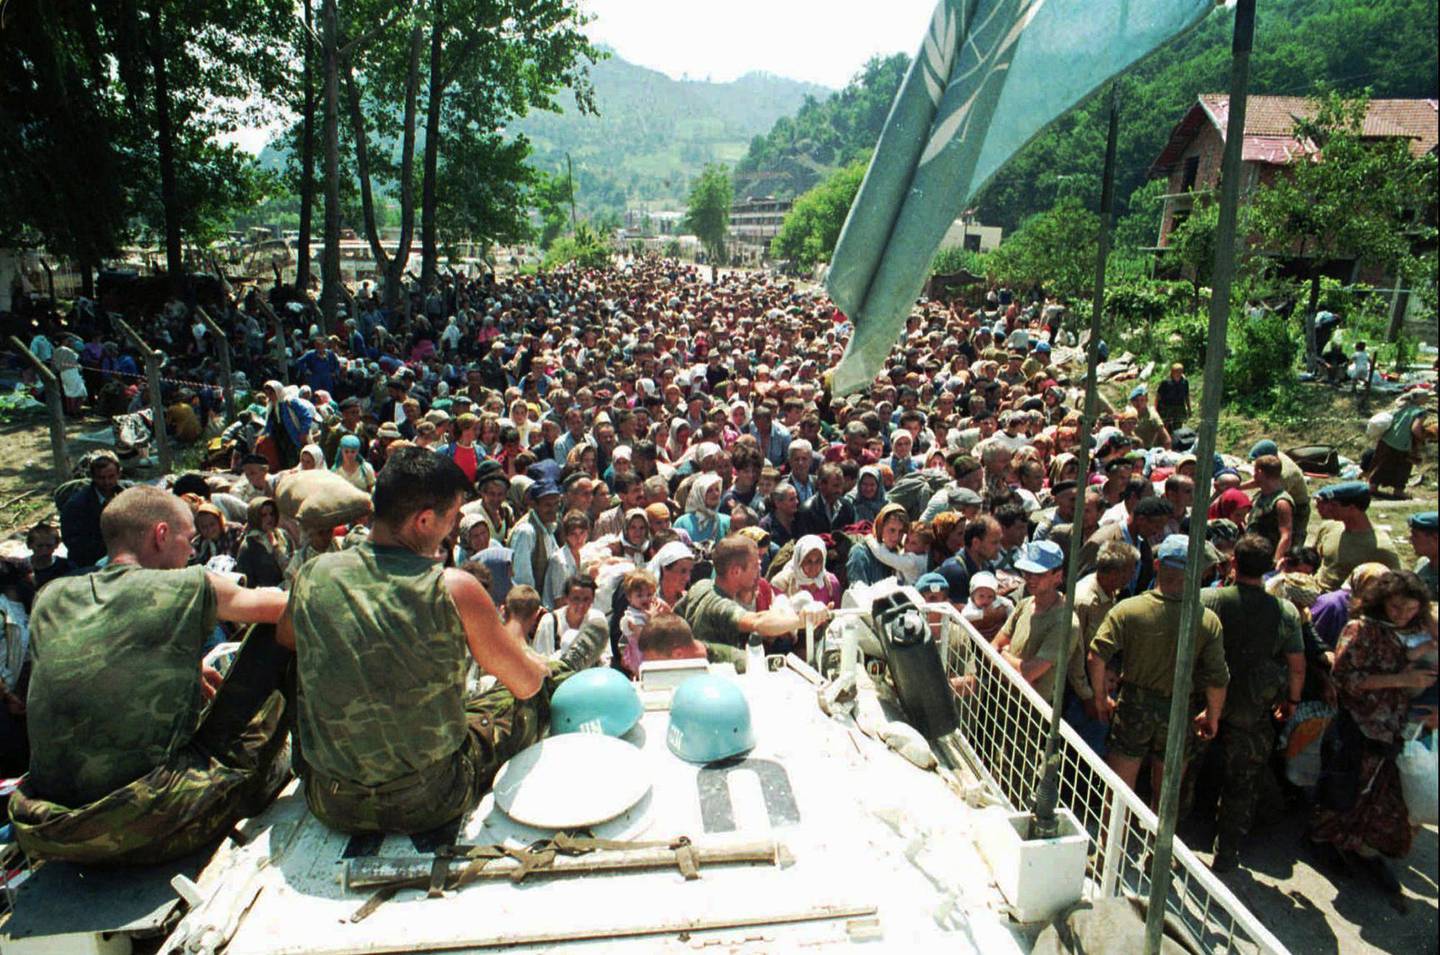 FILE - In this July 13, 1995 file photo, Dutch U.N. peacekeepers sit on top of an armored personnel carrier while Muslim refugees from Srebrenica, eastern Bosnia, gather in the village of Potocari, just north of Srebrenica. The Dutch Supreme Court is ruling Friday July 19, 2019 in a long-running legal battle over whether the Netherlands can be held liable in the deaths of more than 300 Muslim men who were murdered by Bosnian Serb forces during the 1995 Srebrenica massacre. (AP Photo/File)